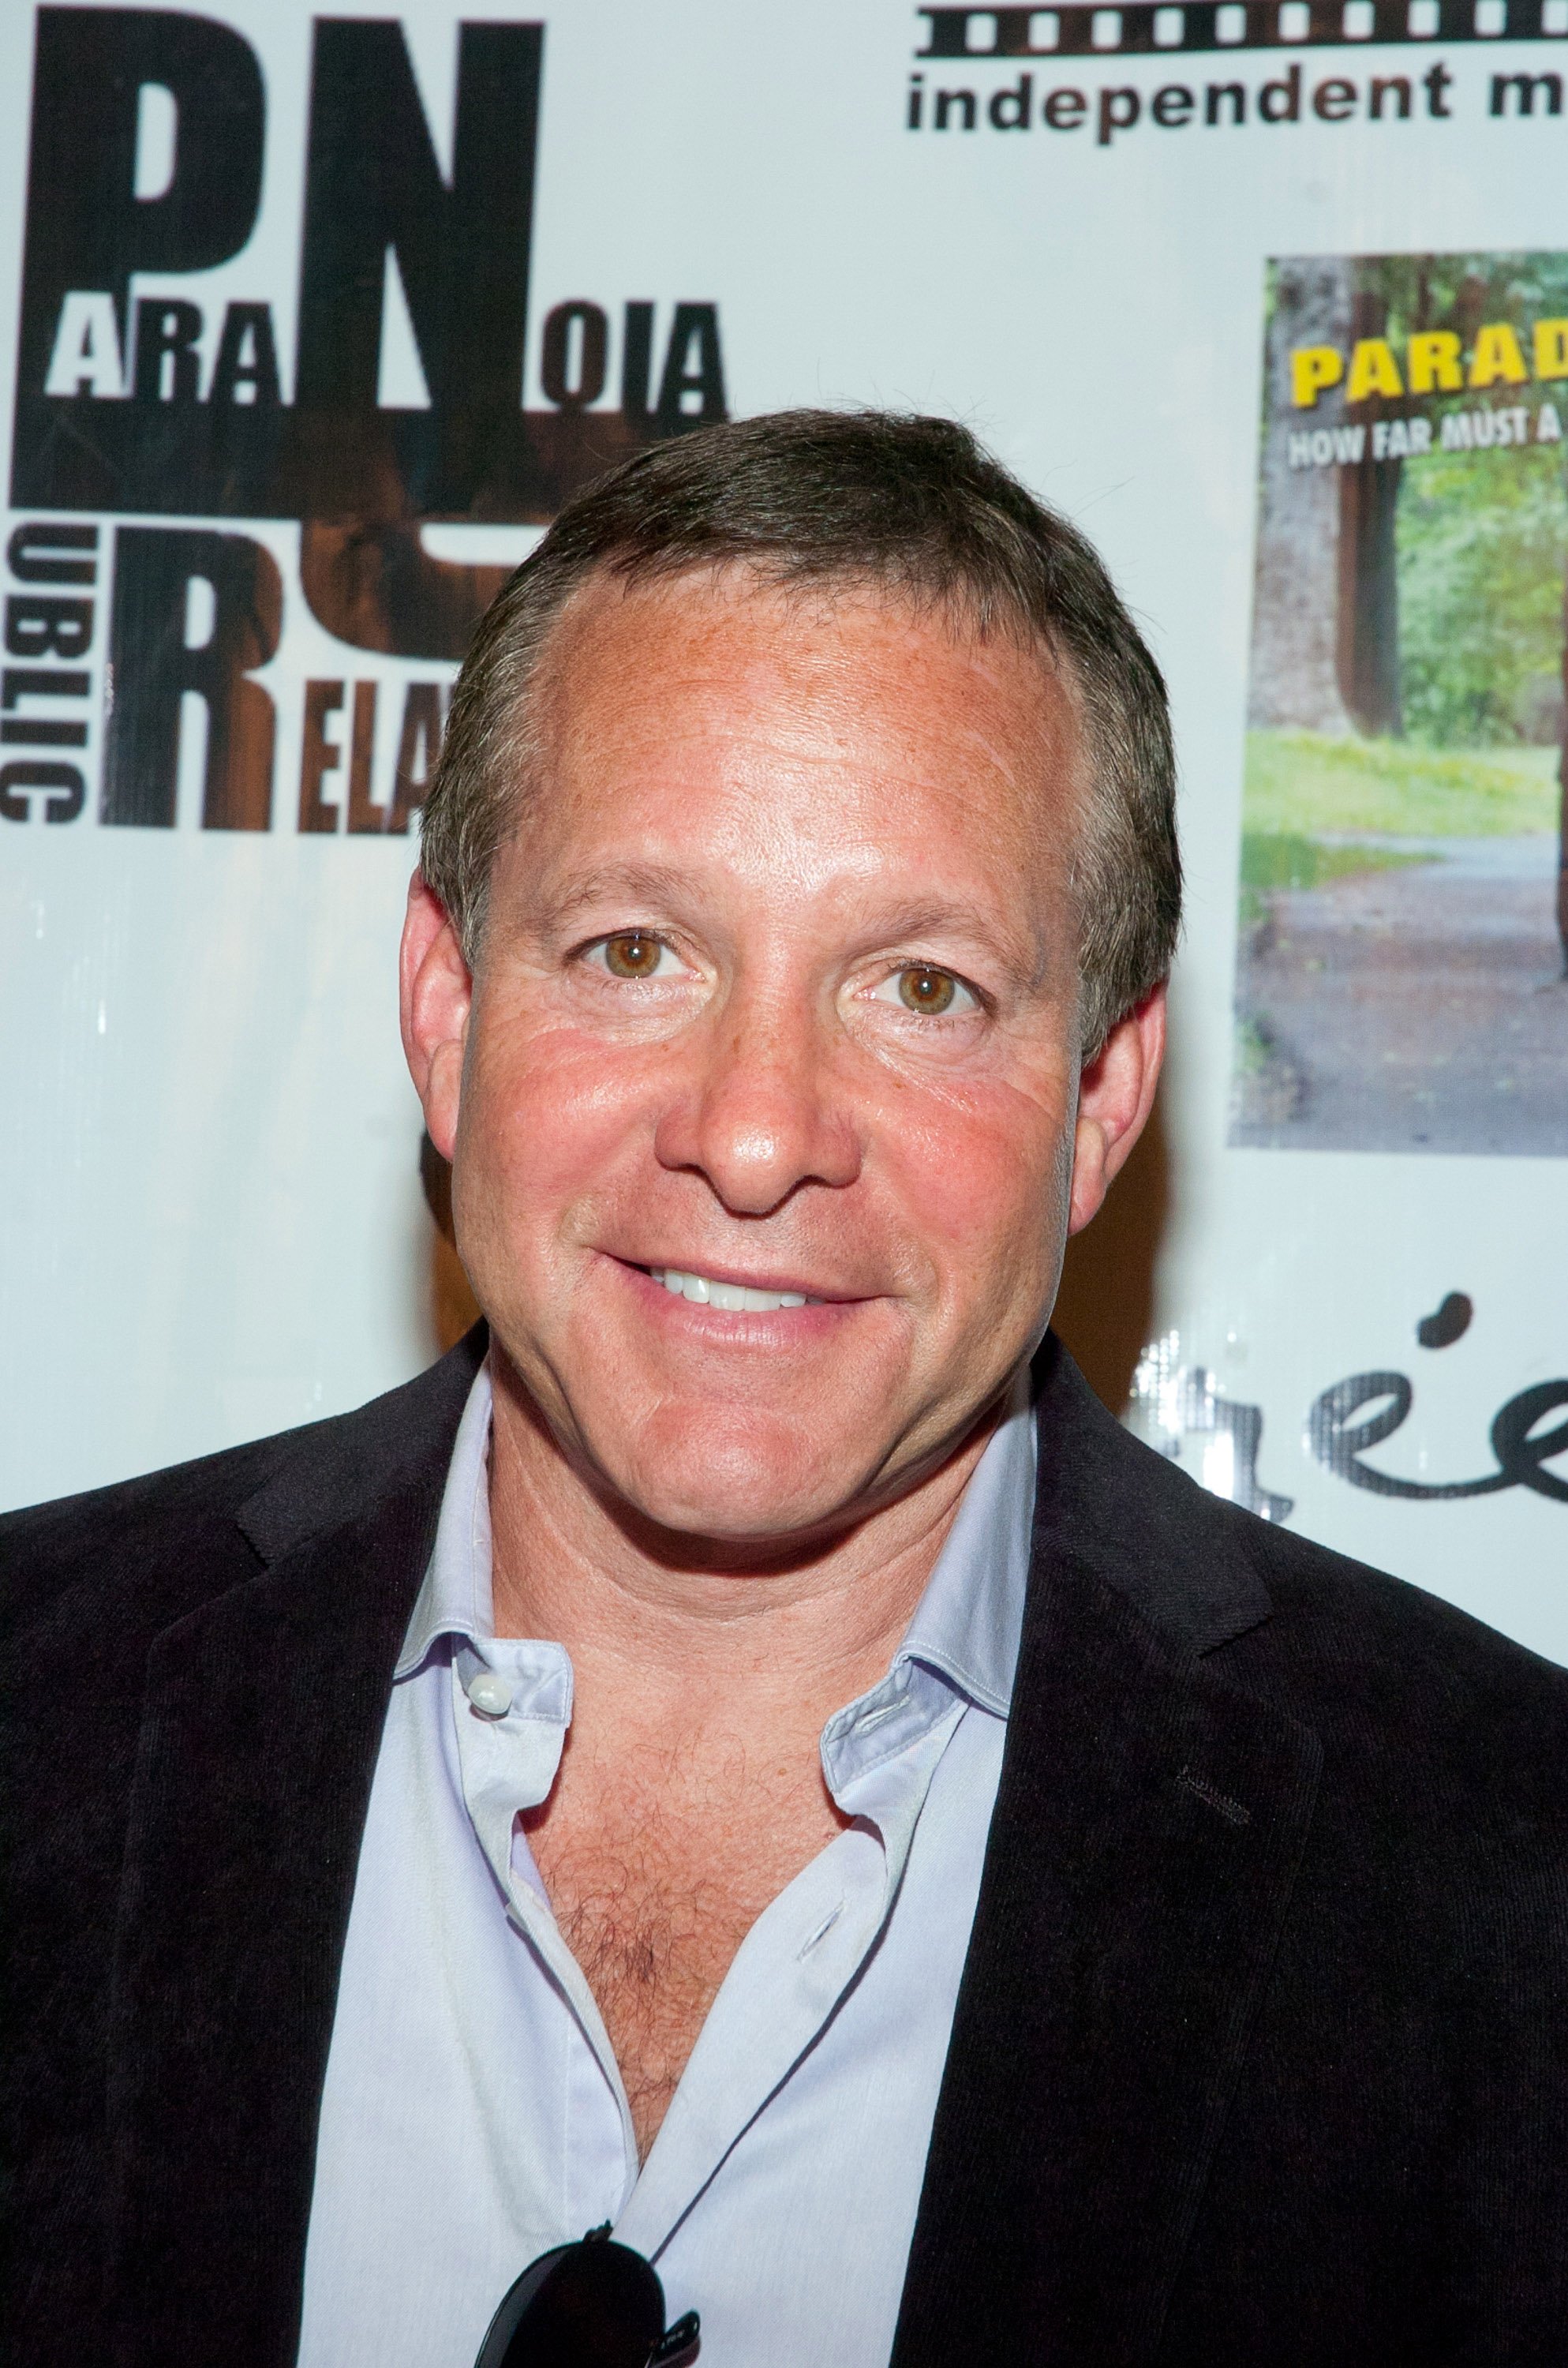 Steve Guttenberg Left Career as He Wanted to Be Closer to His Family